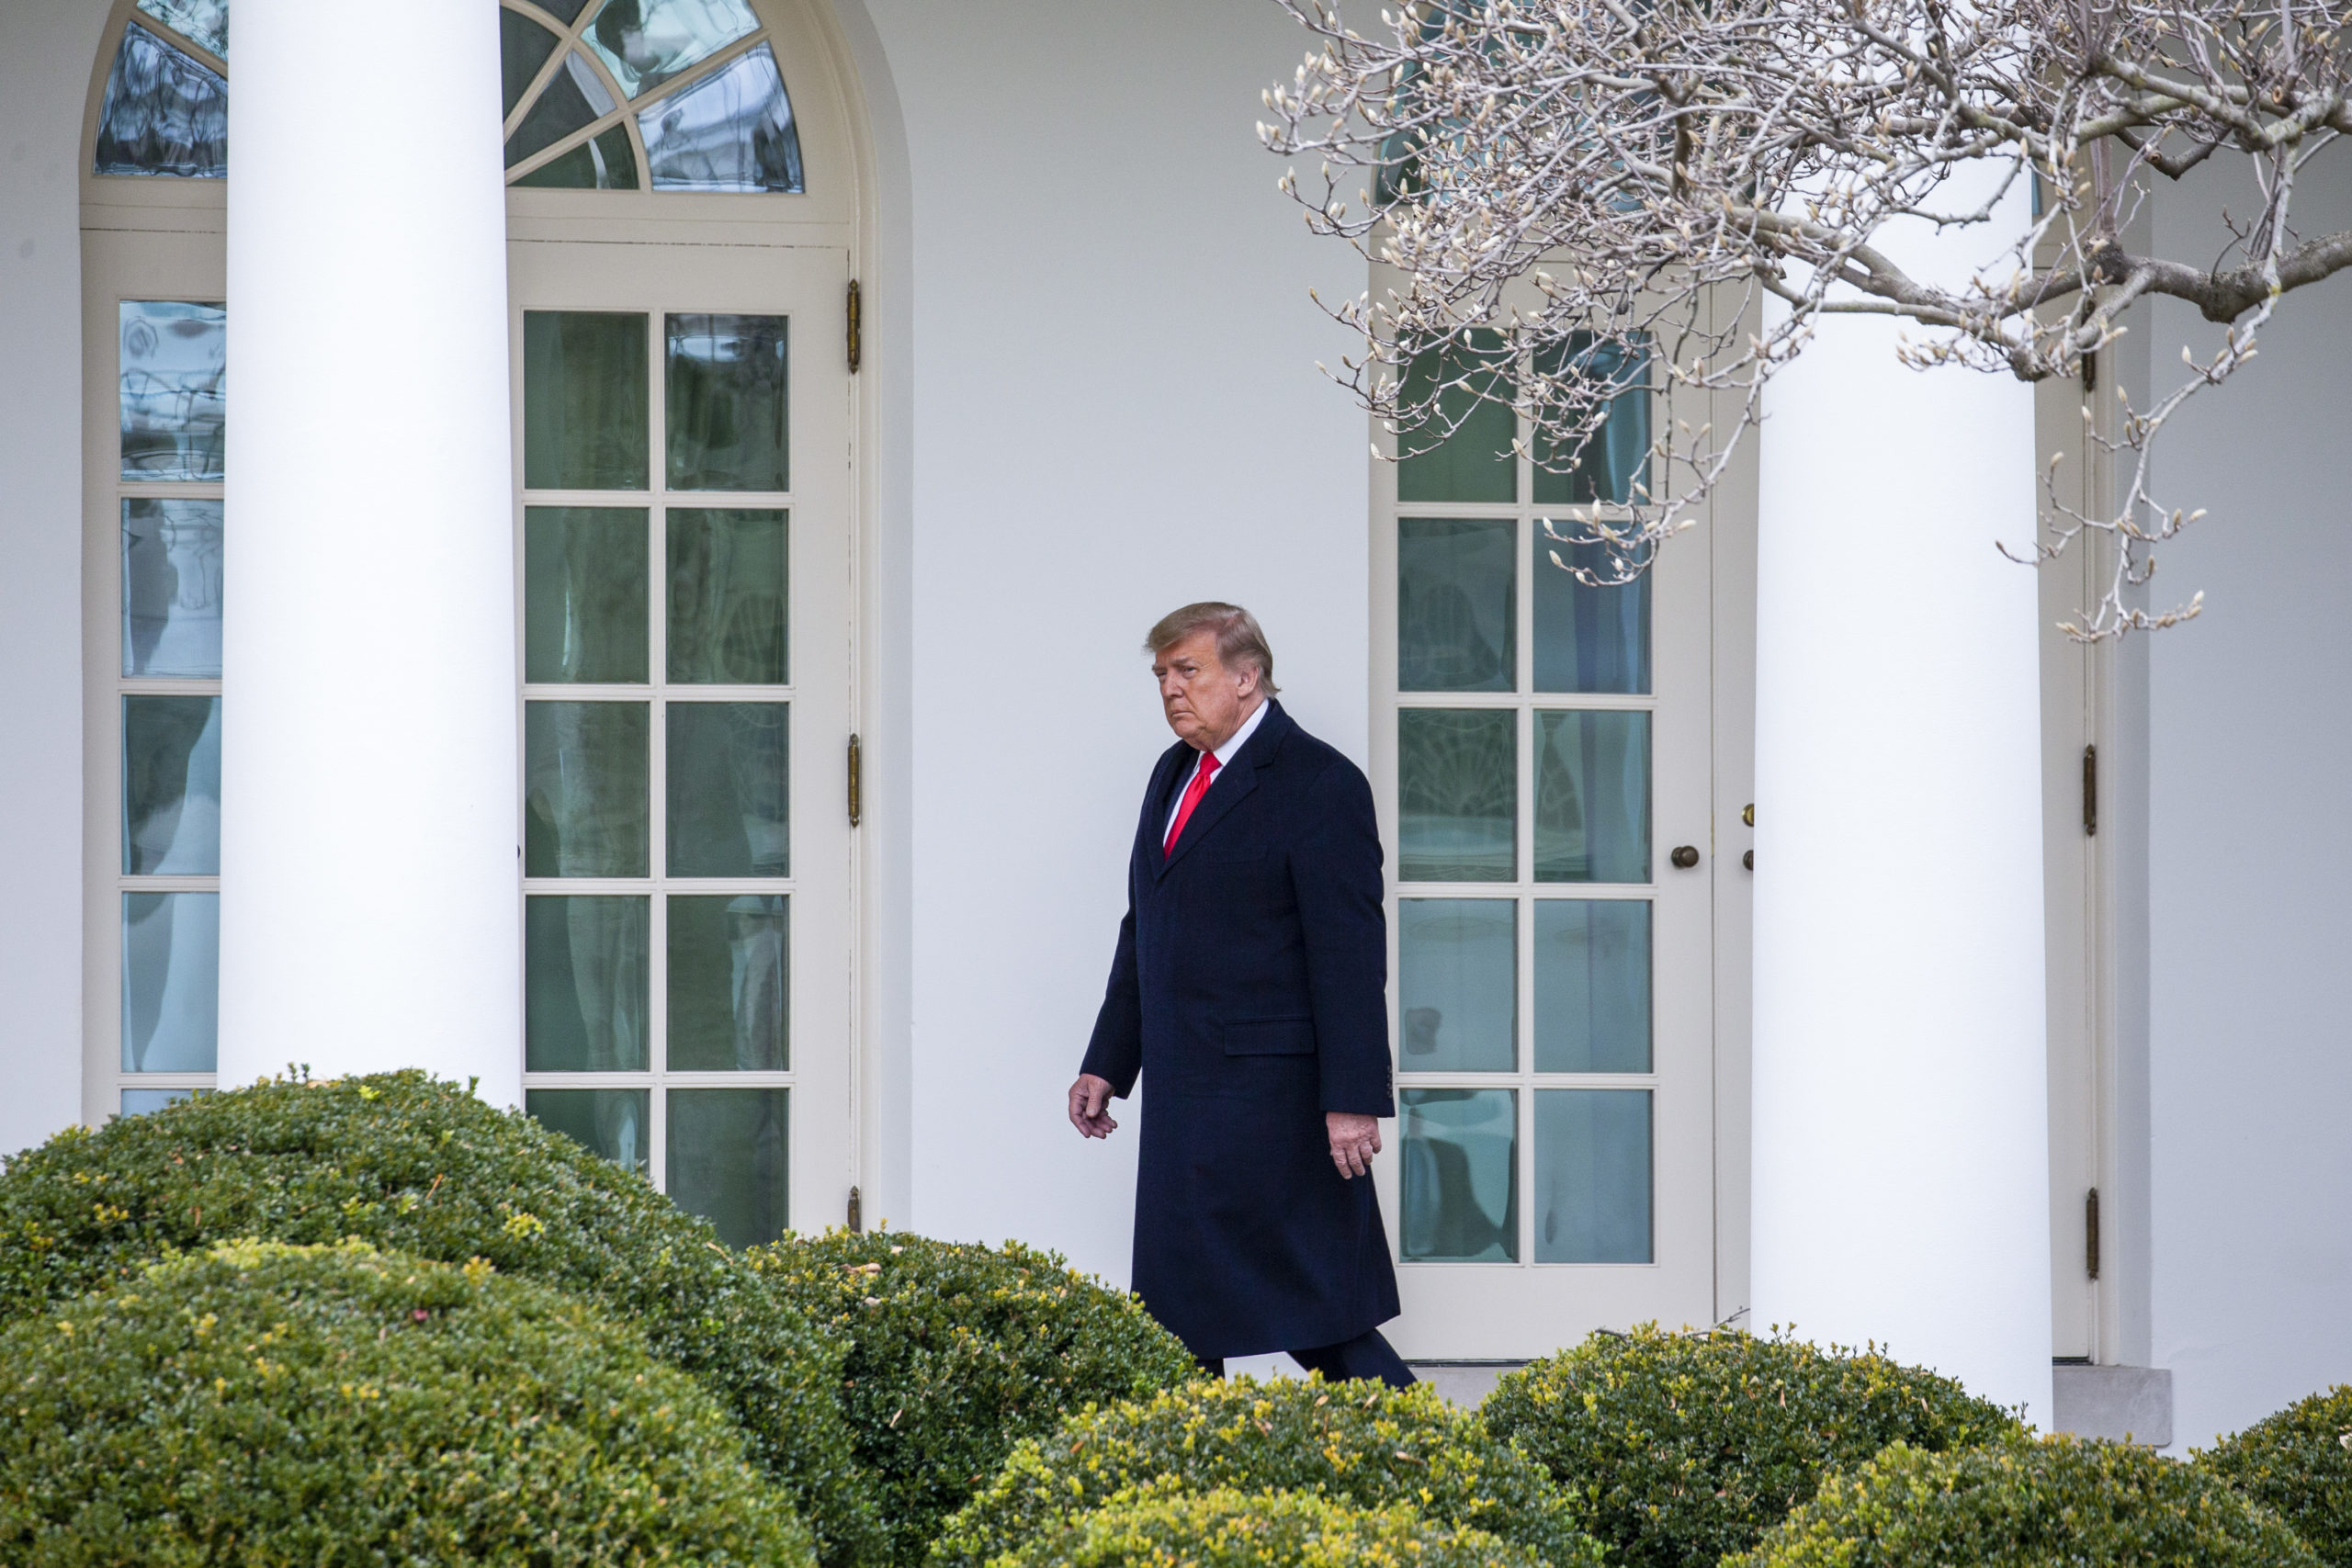 WASHINGTON, DC - DECEMBER 31: U.S. President Donald Trump walks to the Oval Office while arriving back at the White House on December 31, 2020 in Washington, DC. President Trump and the First Lady returned to Washington, DC early and will not be in attendance at the annual New Years Eve party at his Mar-a-Lago home in Palm Beach. (Photo by Tasos Katopodis/Getty Images)